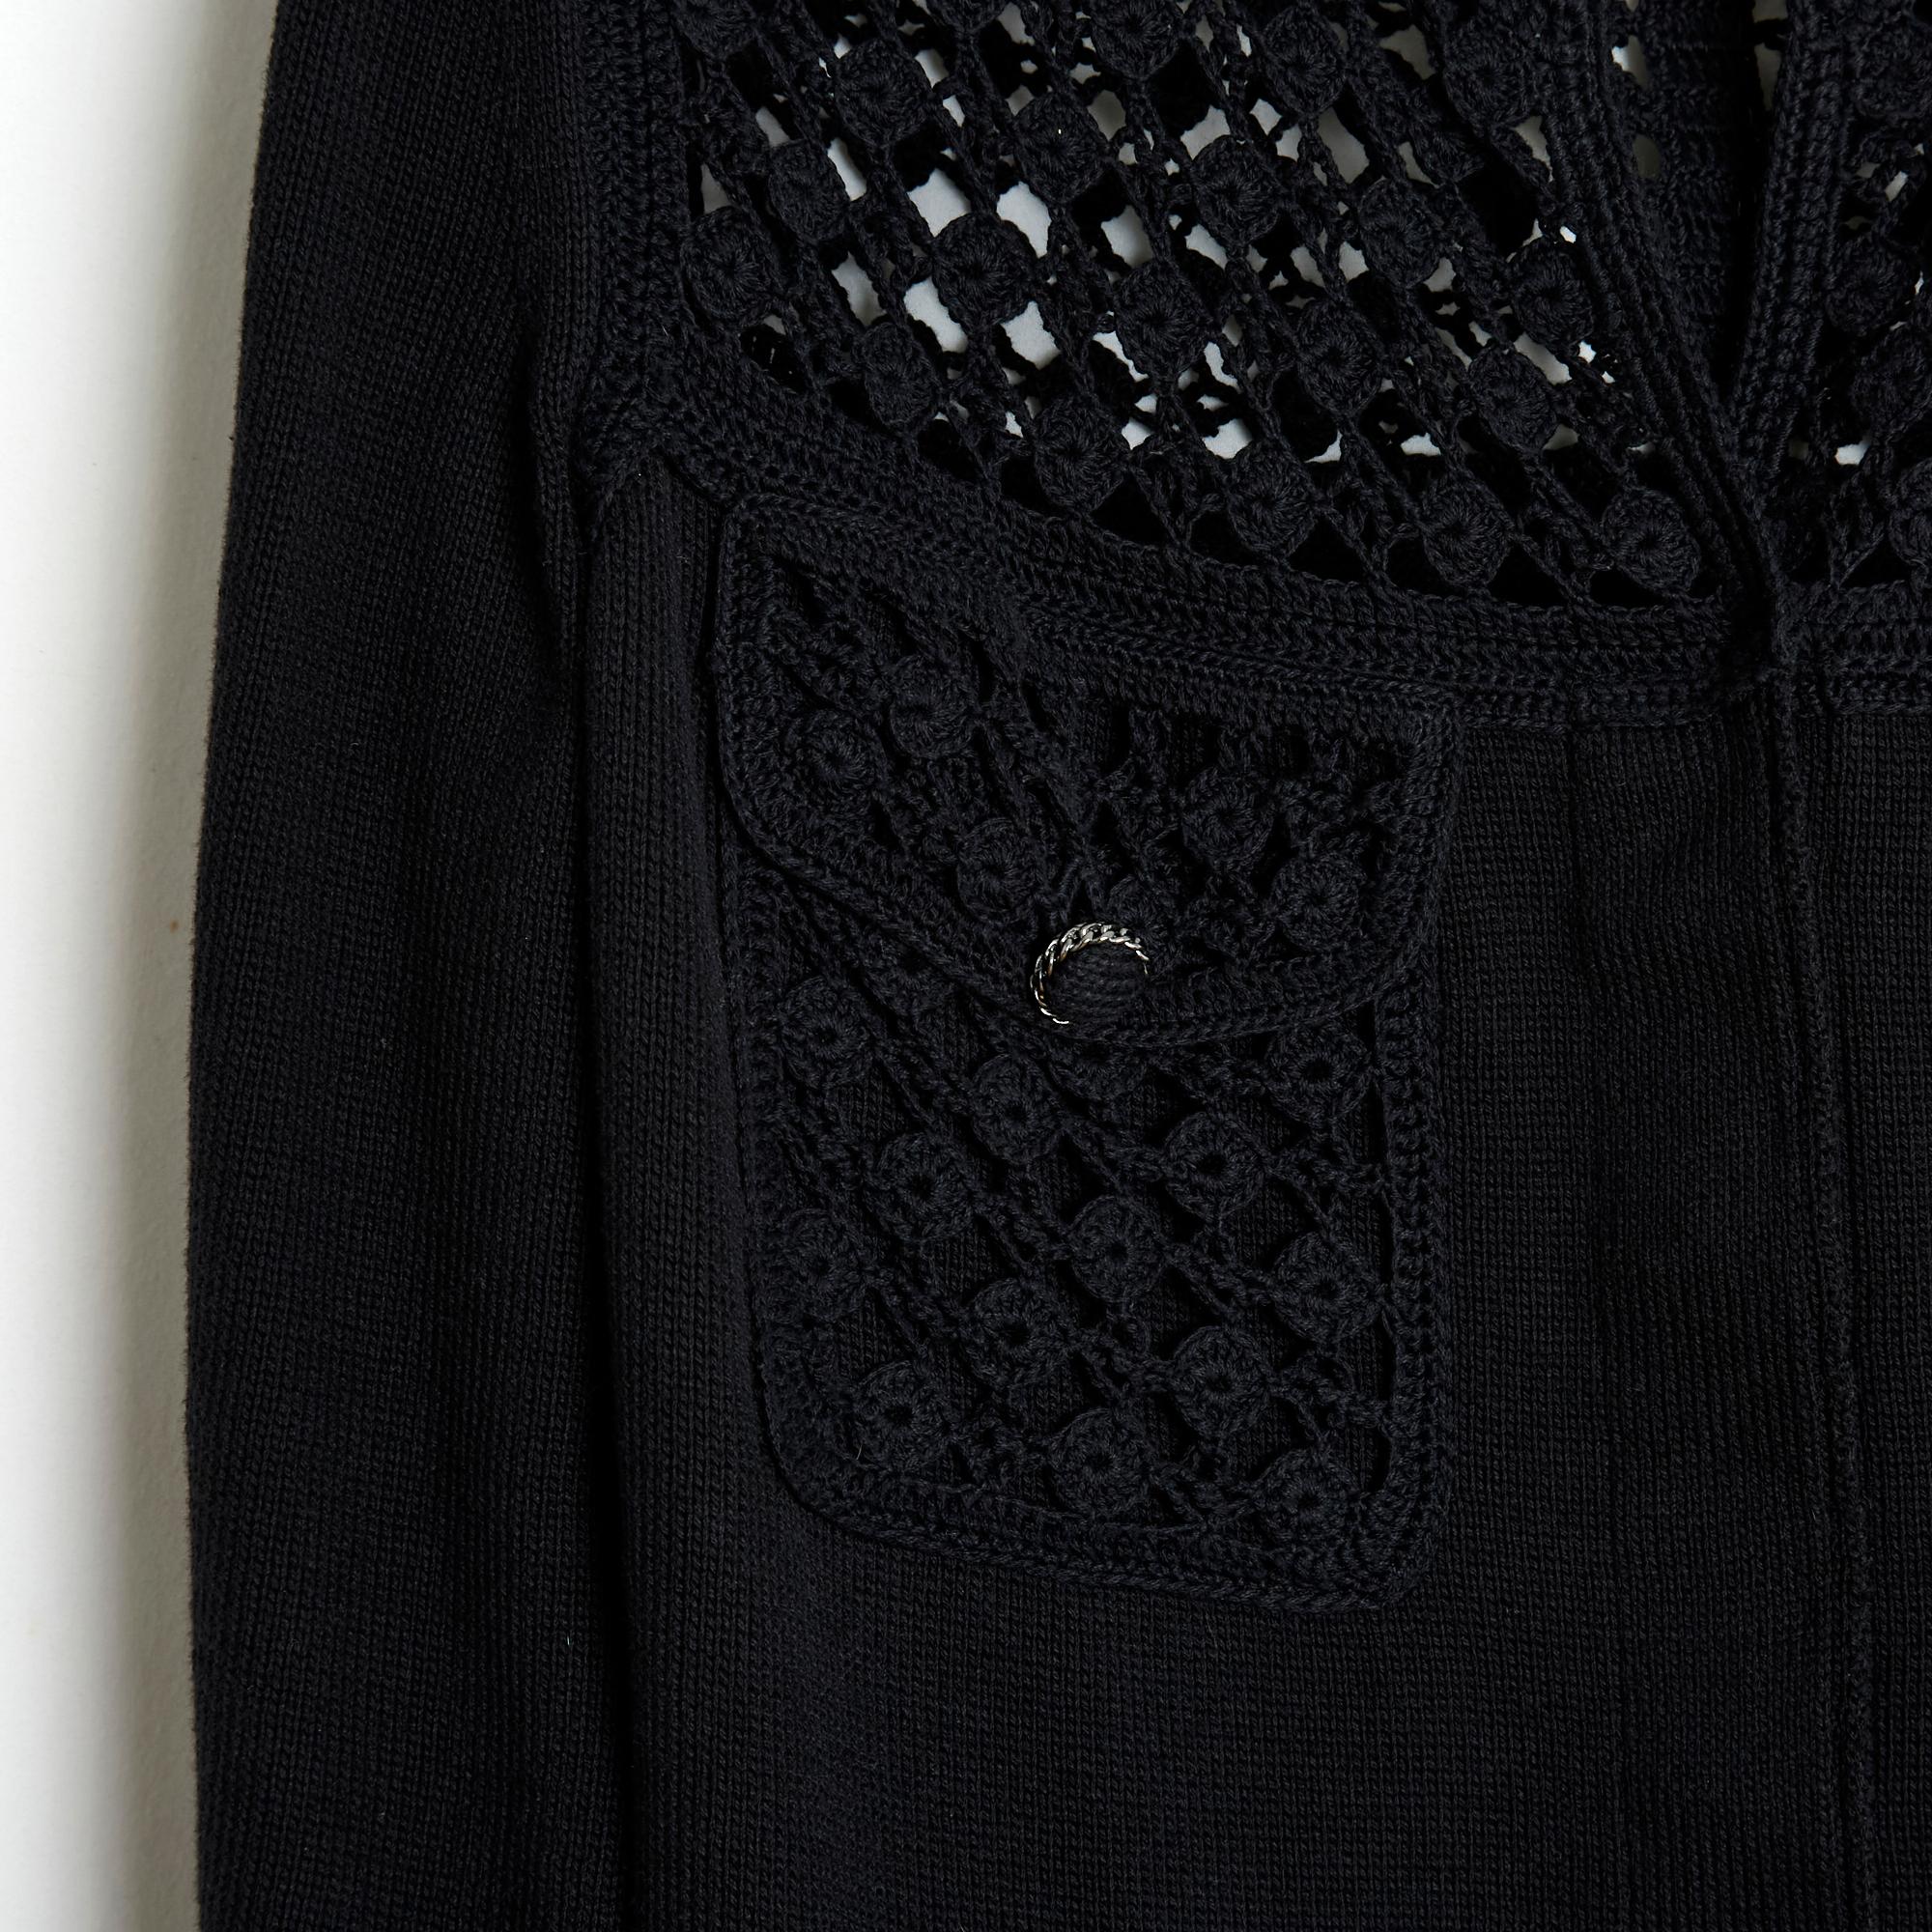 Chanel cardigan from the Spring Summer 2006 collection, like a little black cotton knit and crochet jacket, round neck closed with 4 hidden Chanel buttons, 2/3 sleeves, 4 flap pockets closed with a button, openwork upper bust, unlined . No more size